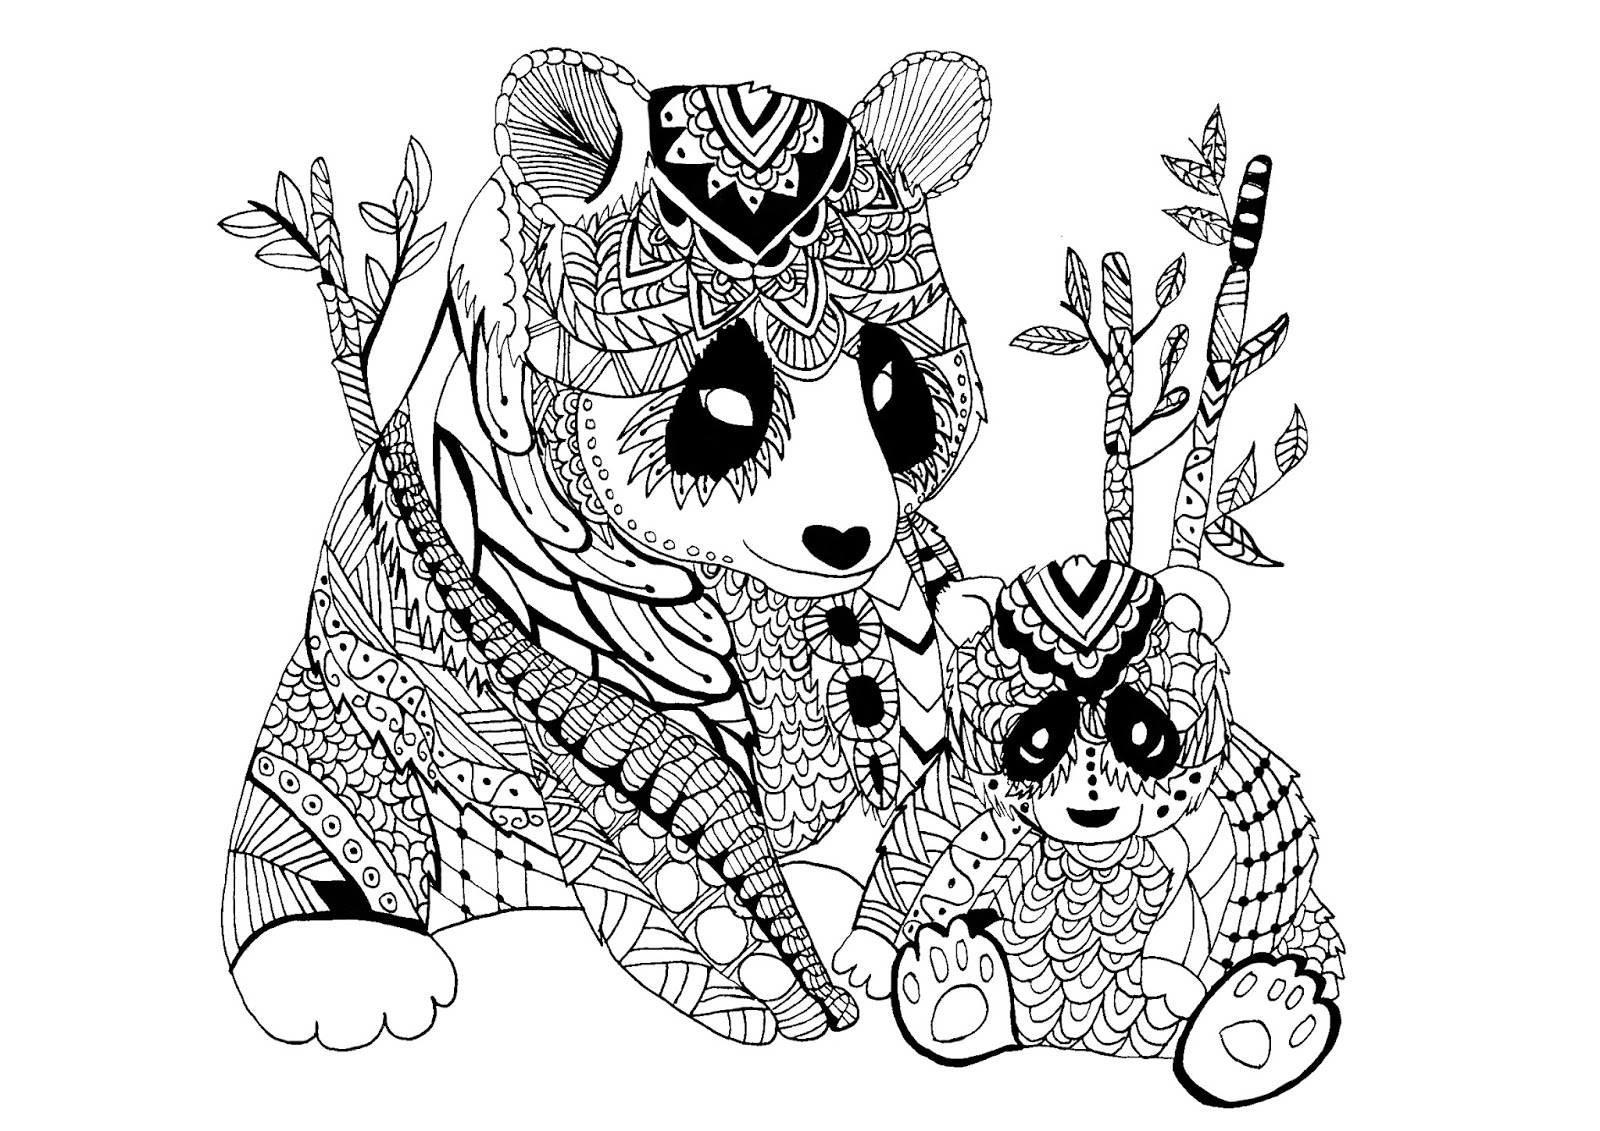 Download Free zen coloring pages for adults to download